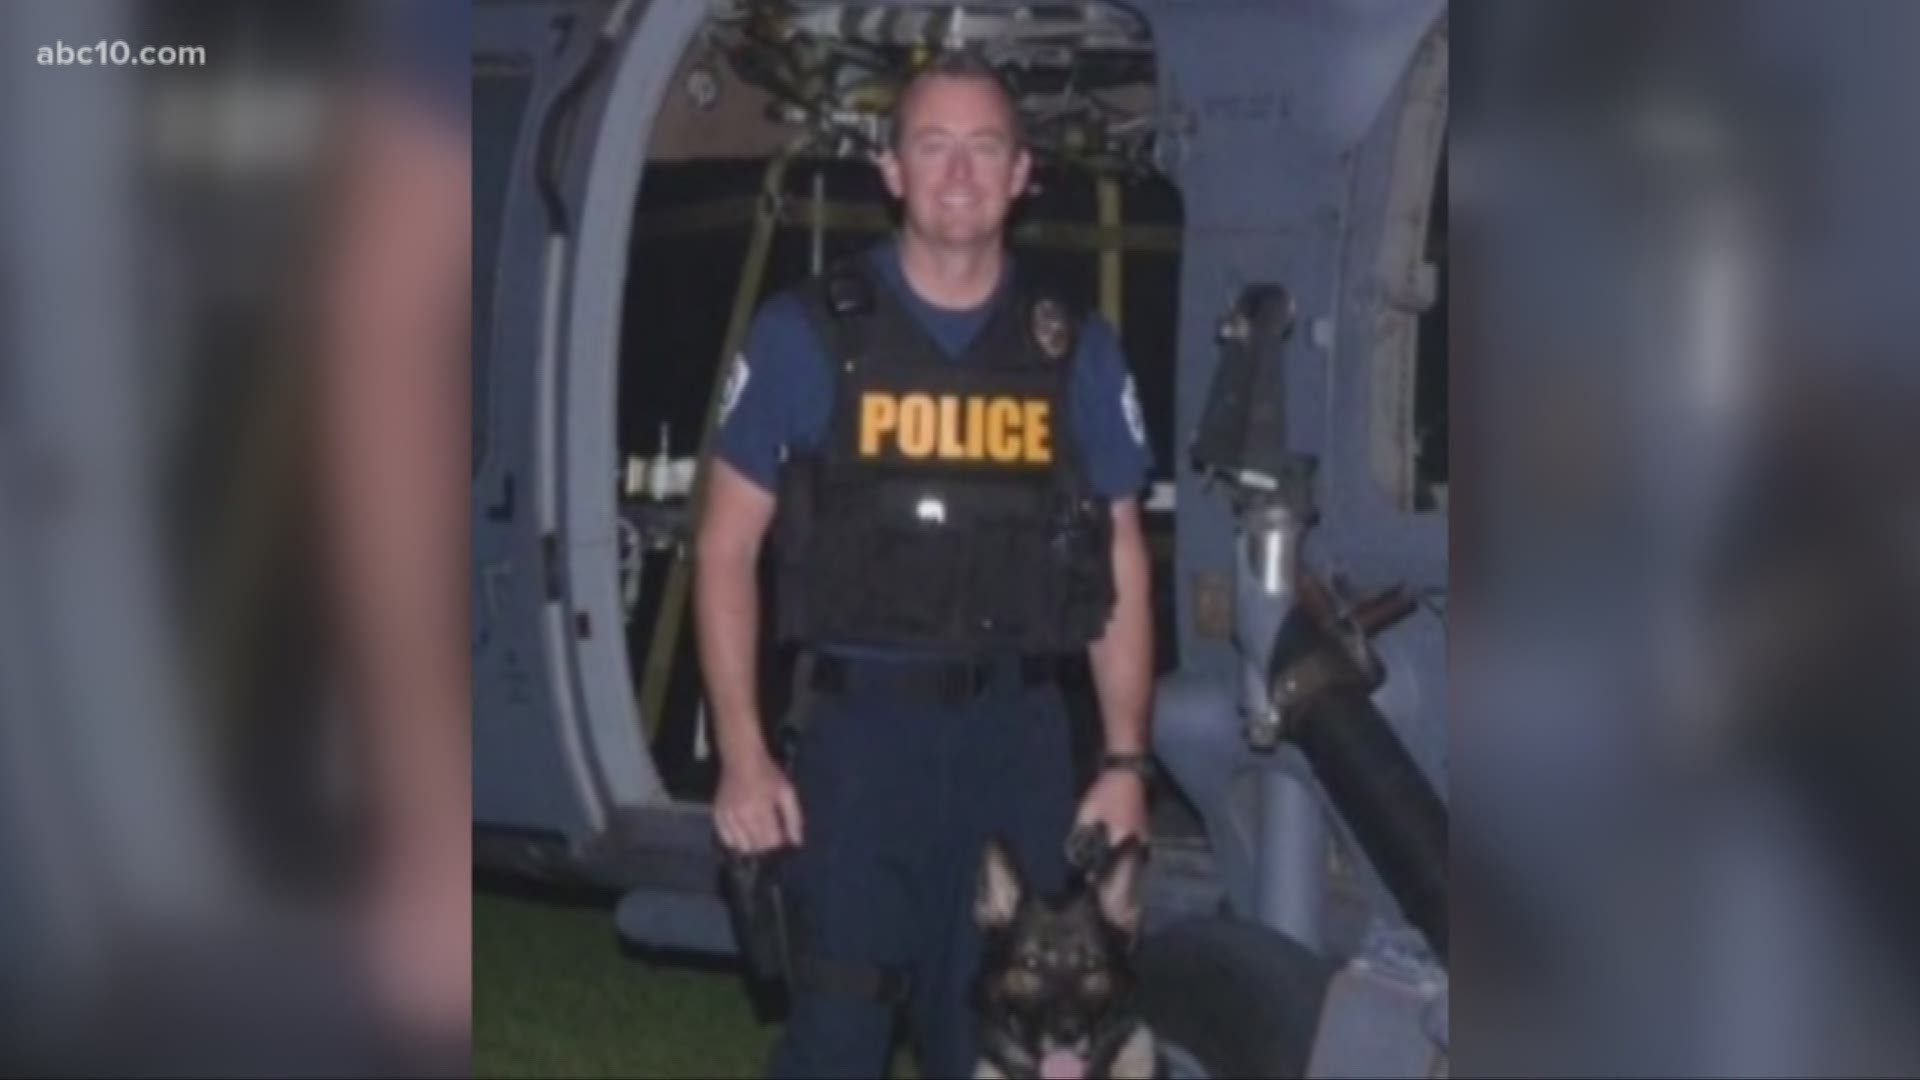 Six years after Galt Police K9 Officer Kevin Tonn was killed in the line of duty, his city won't forget. And this year’s memorial comes just days after Davis Police Officer Natalie Corona suffered the same fate.